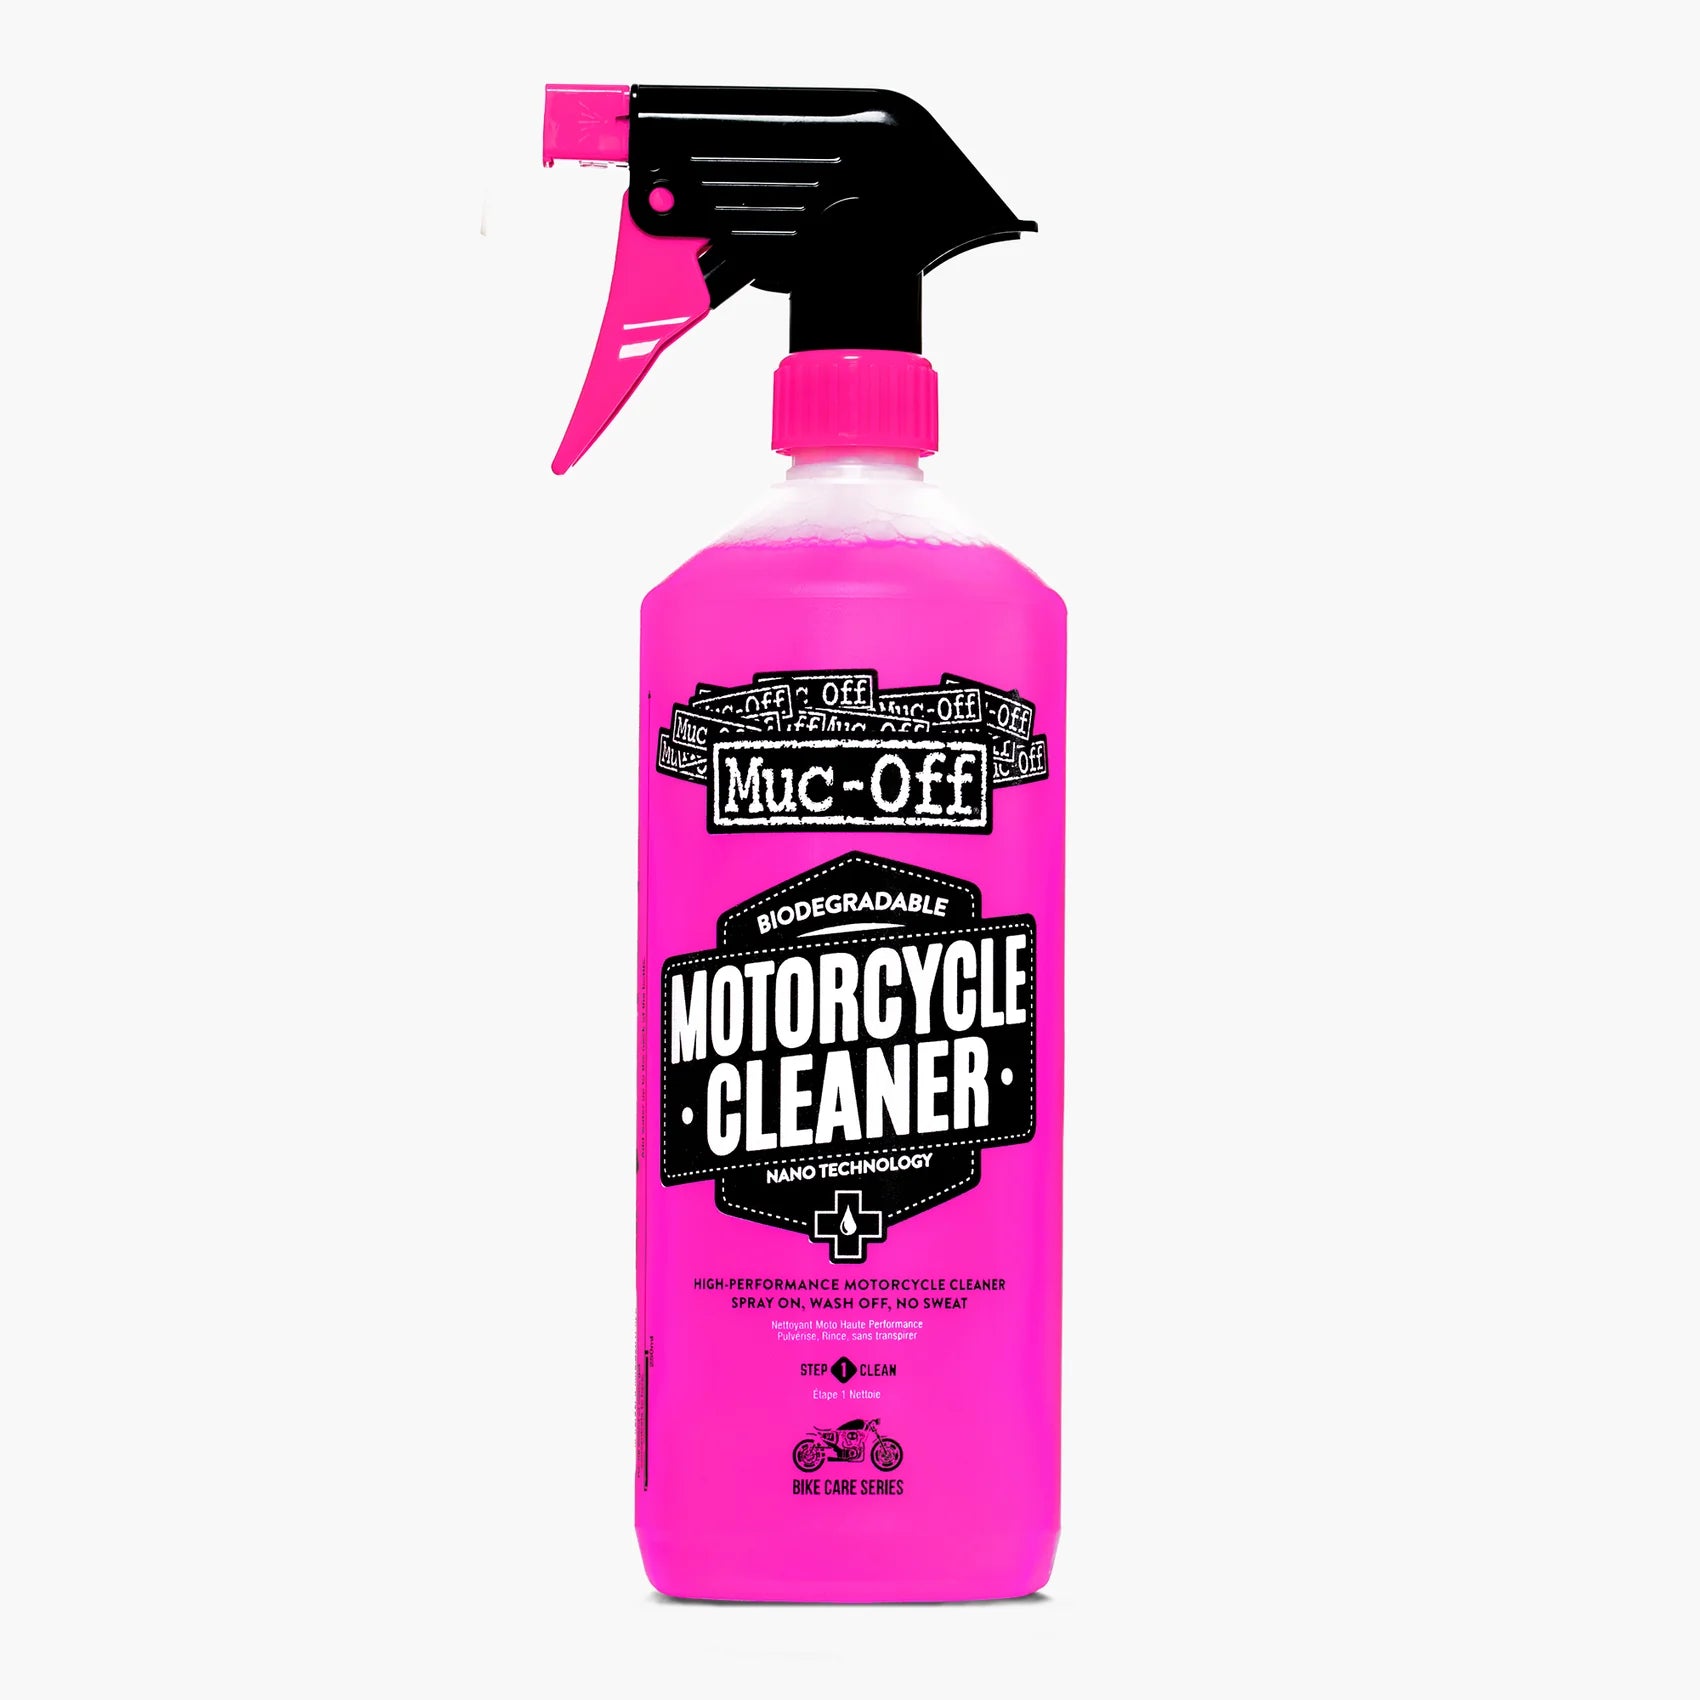 Muc-off Nano Tech Motorcycle Cleaner 1L bottle with logo